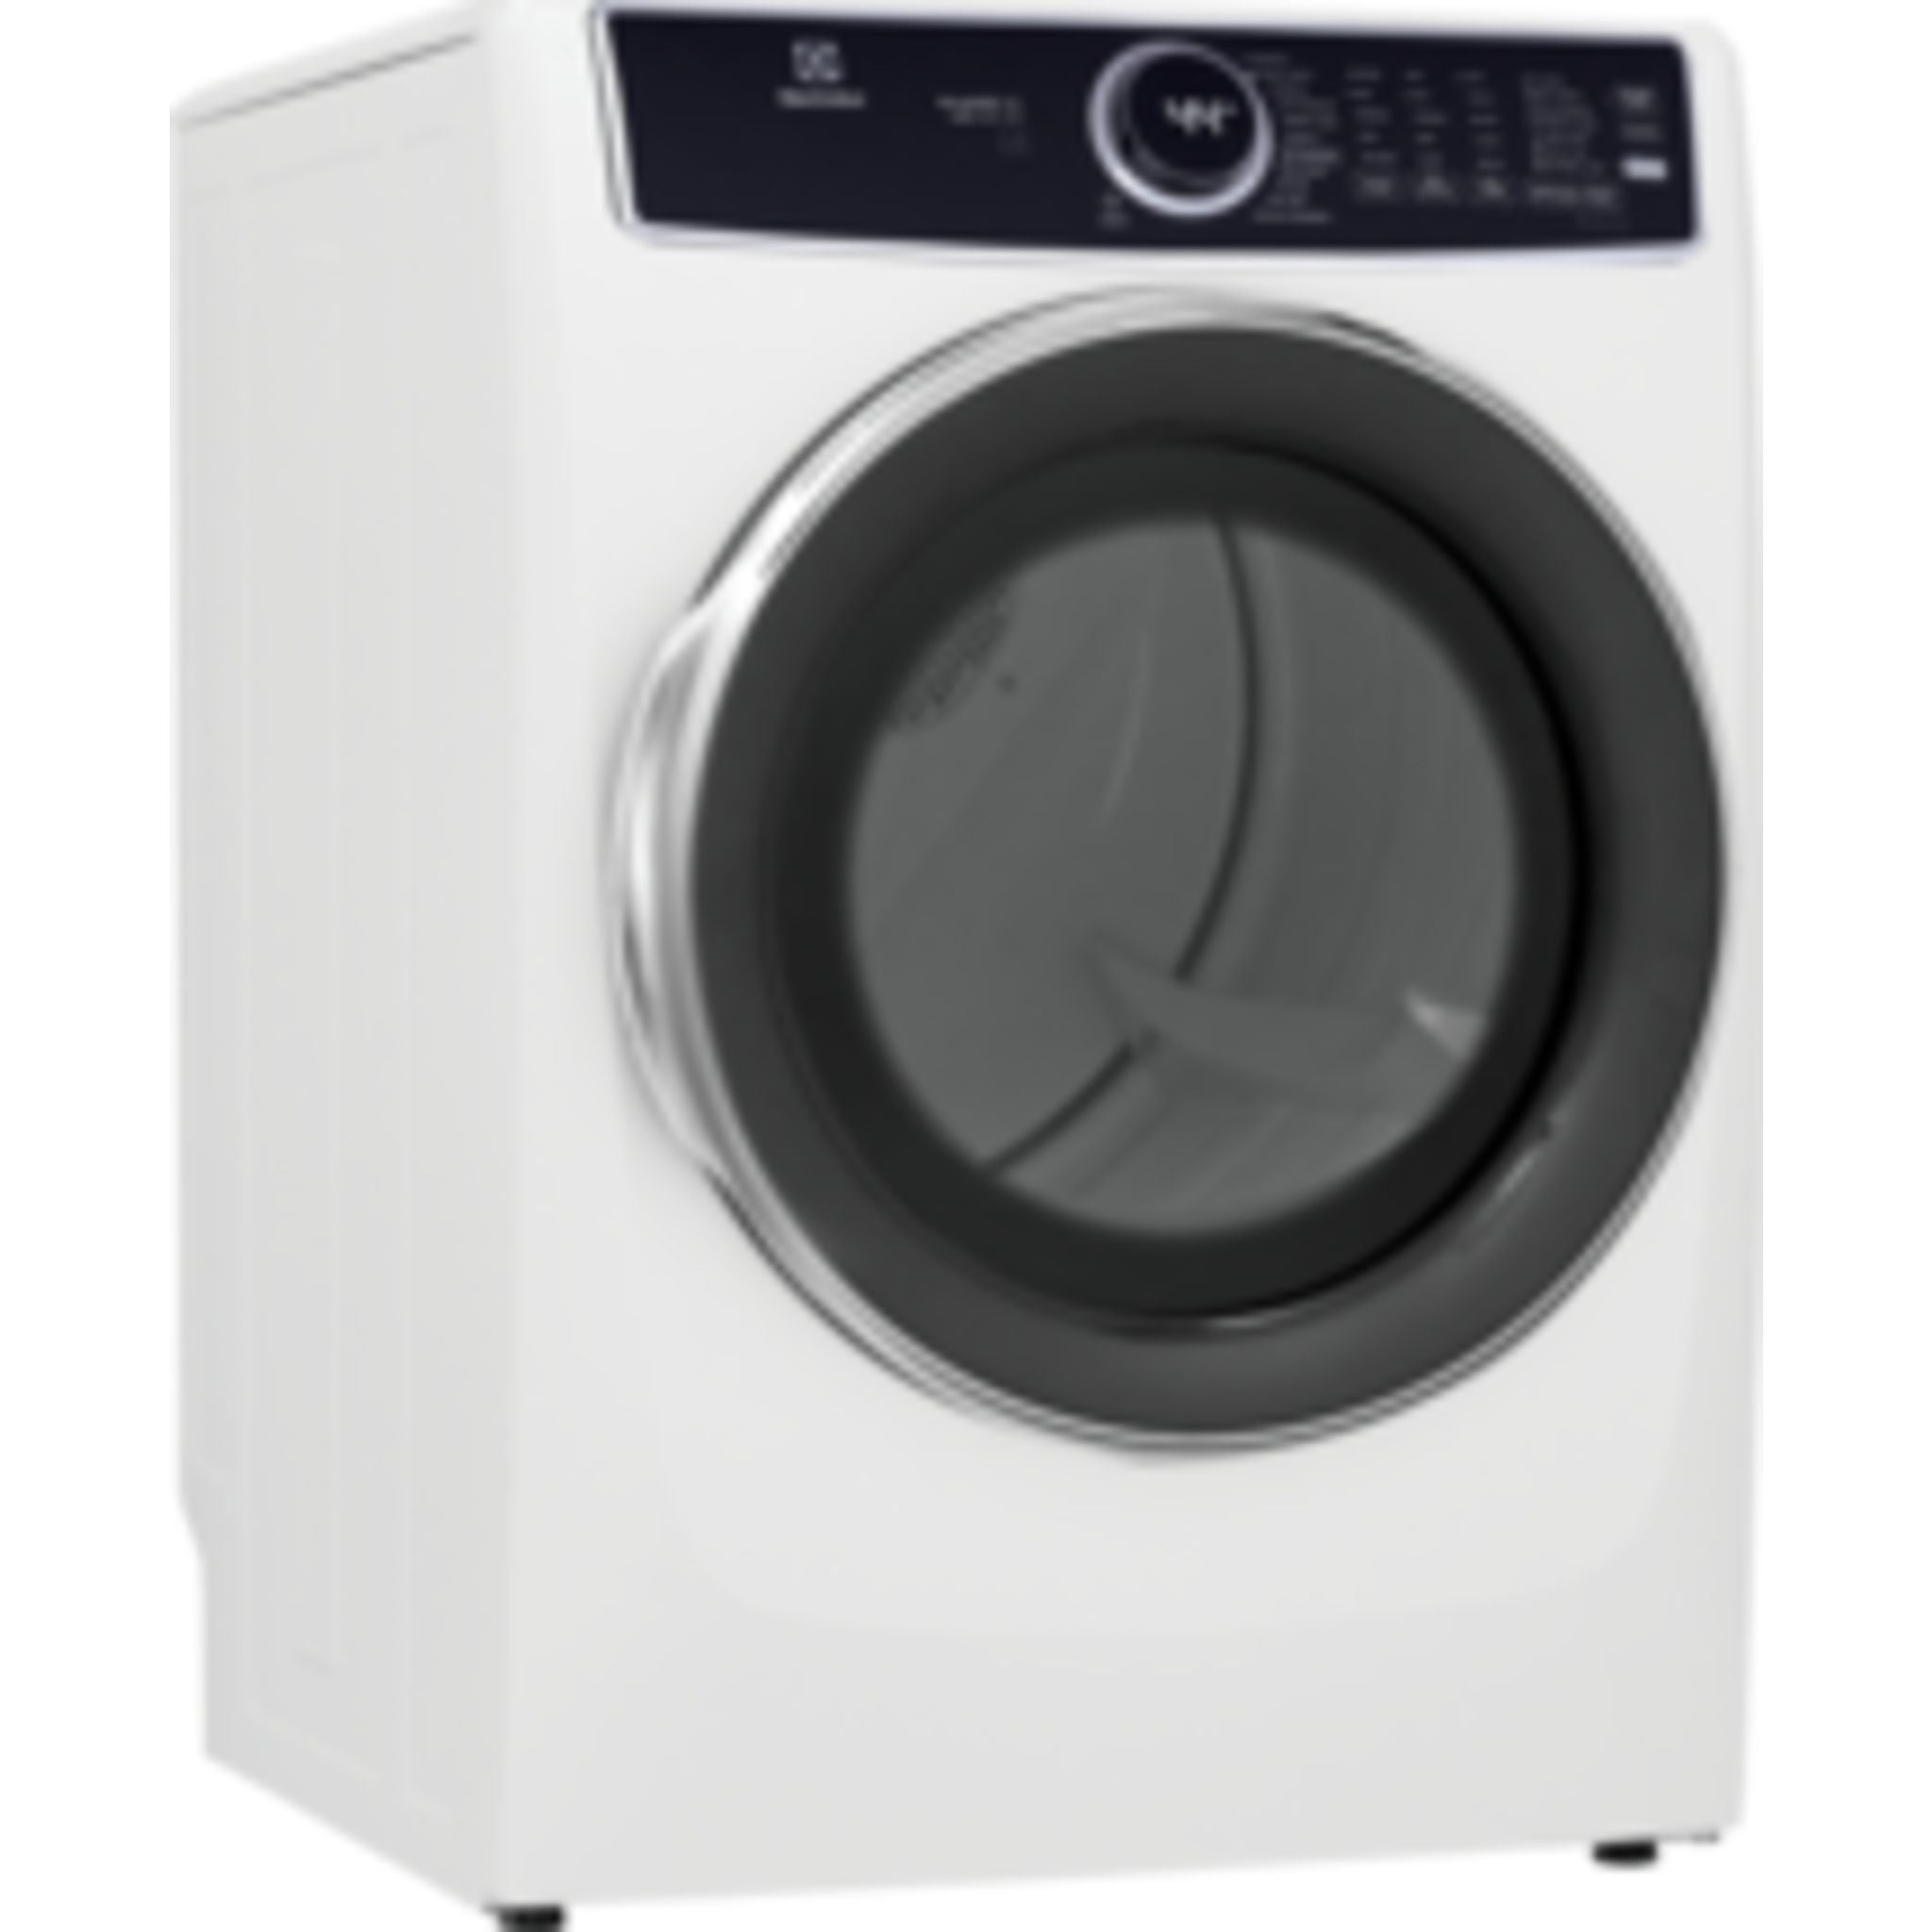 Electrolux Home Products, Electrolux Dryer (ELFE753CAW) - White